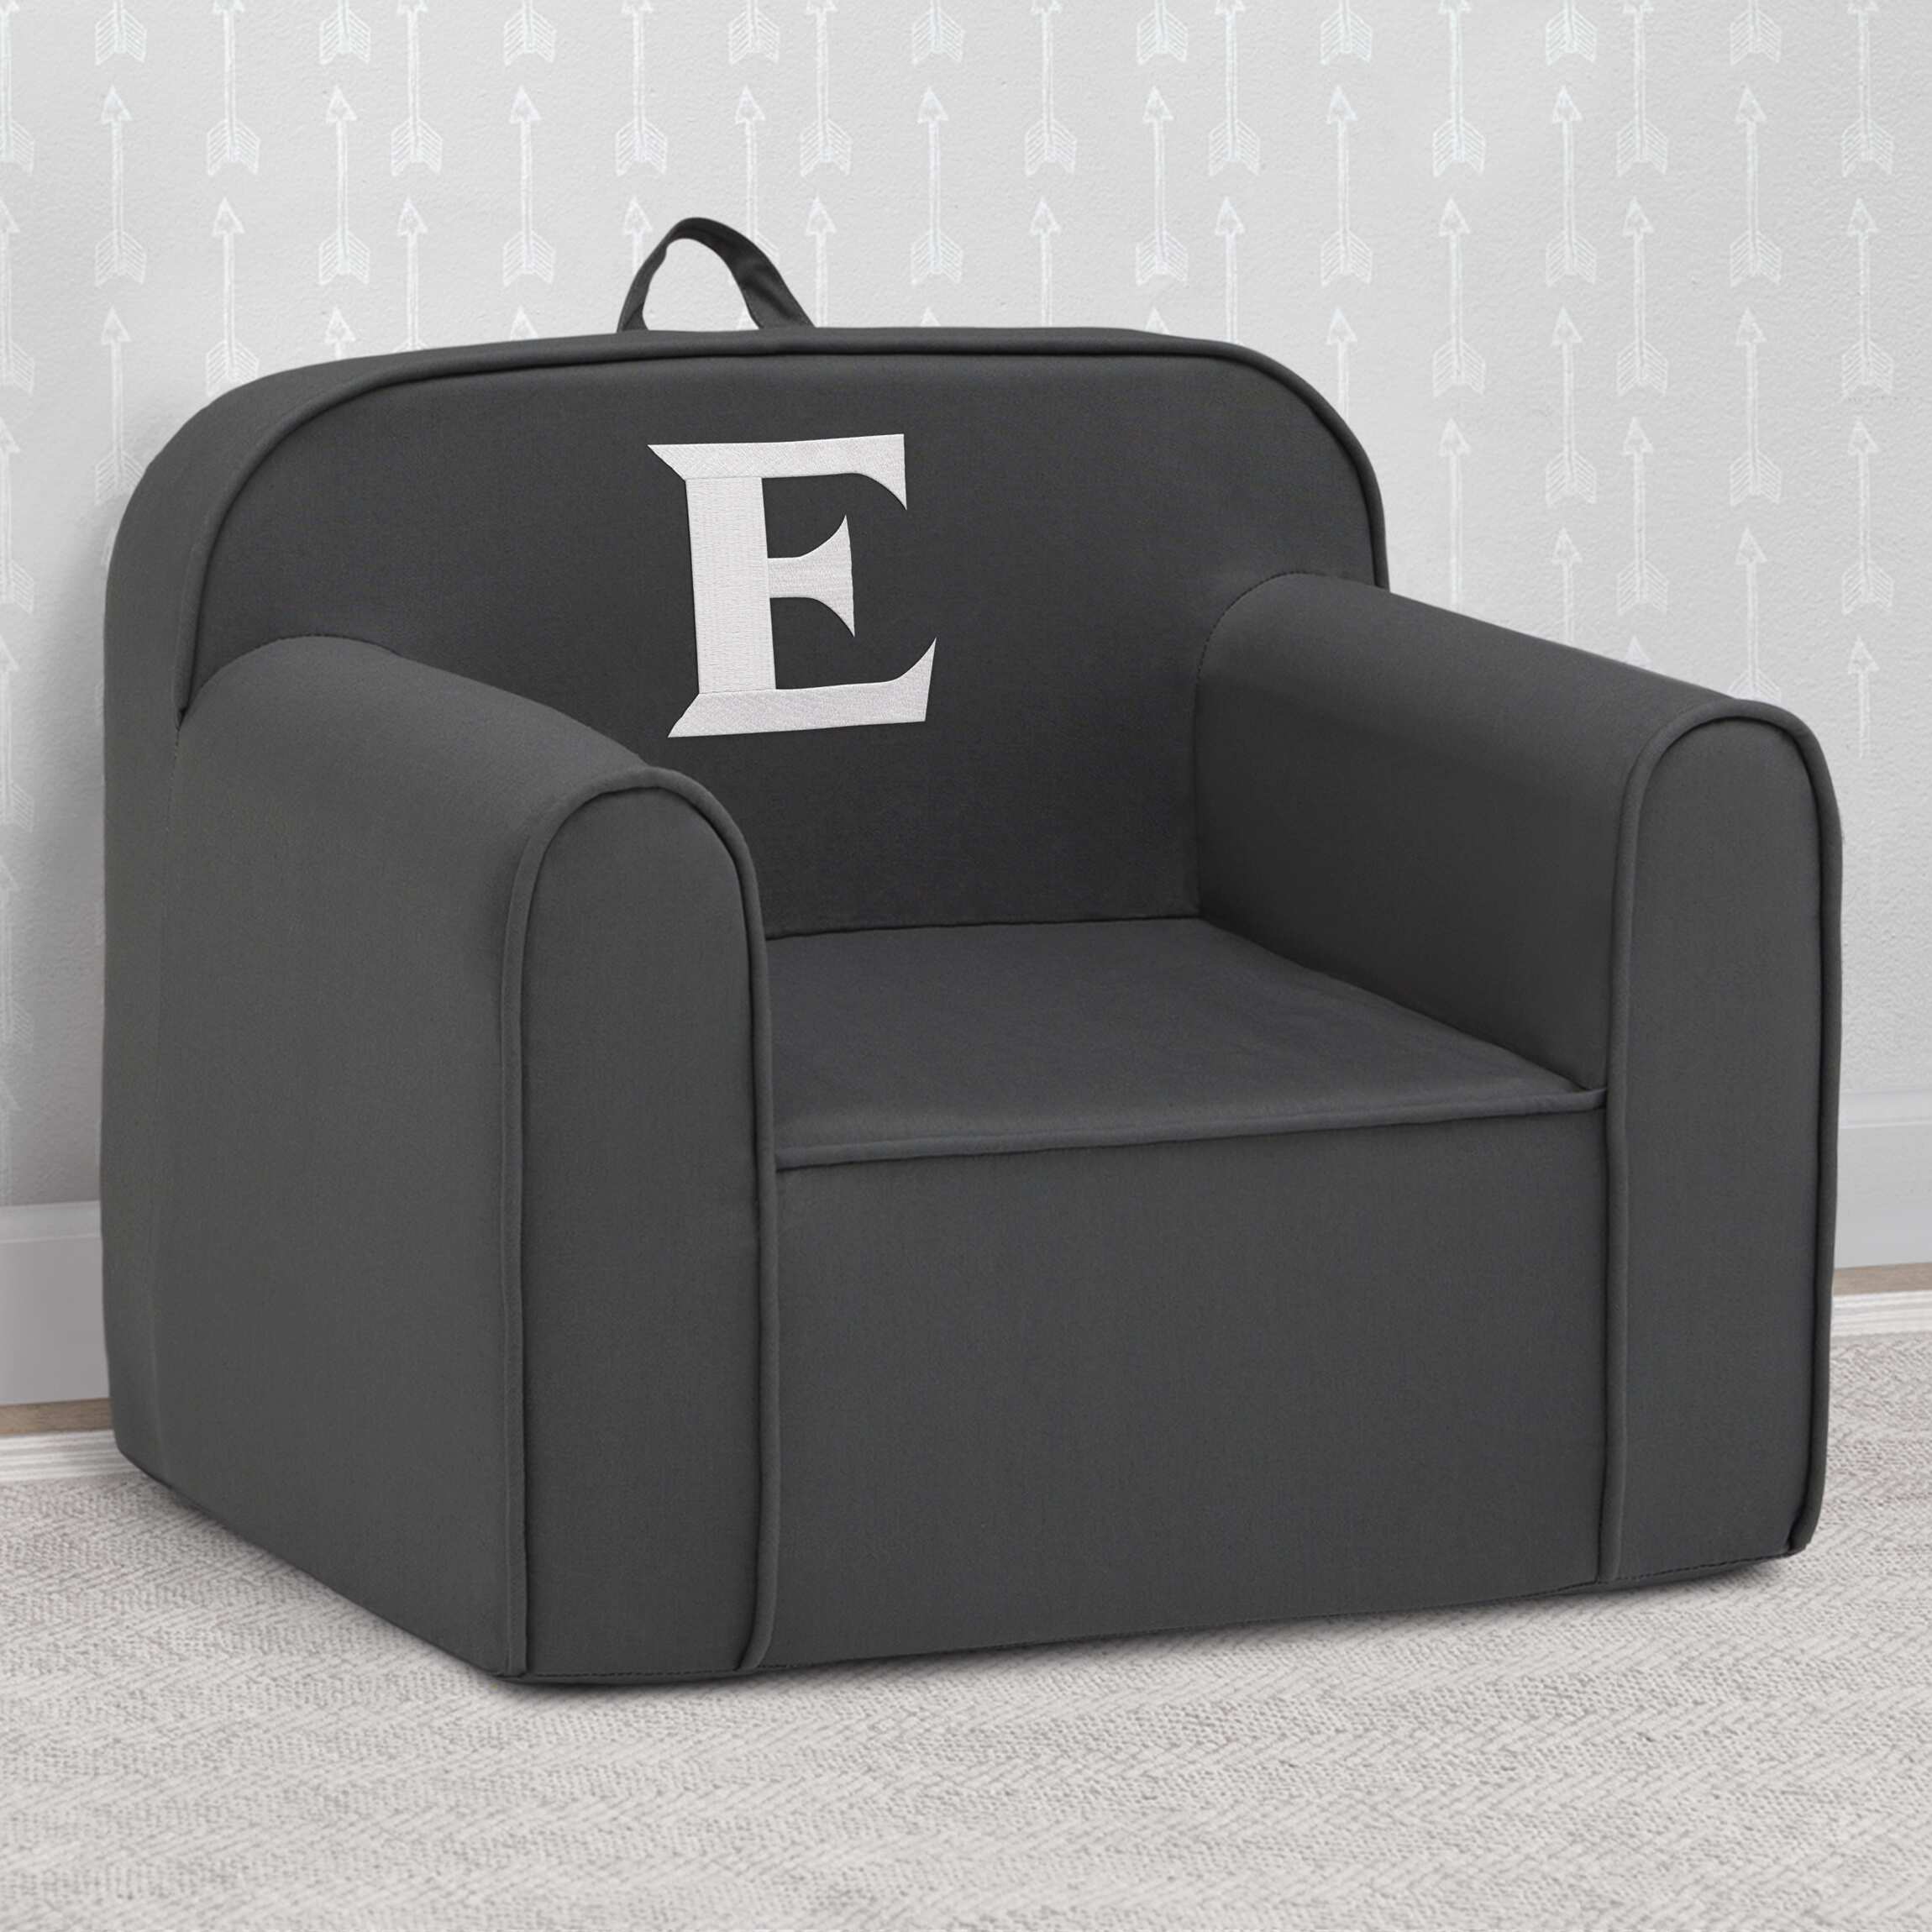 Delta Children Personalized Monogram Cozee Chair - Customize with Letter E